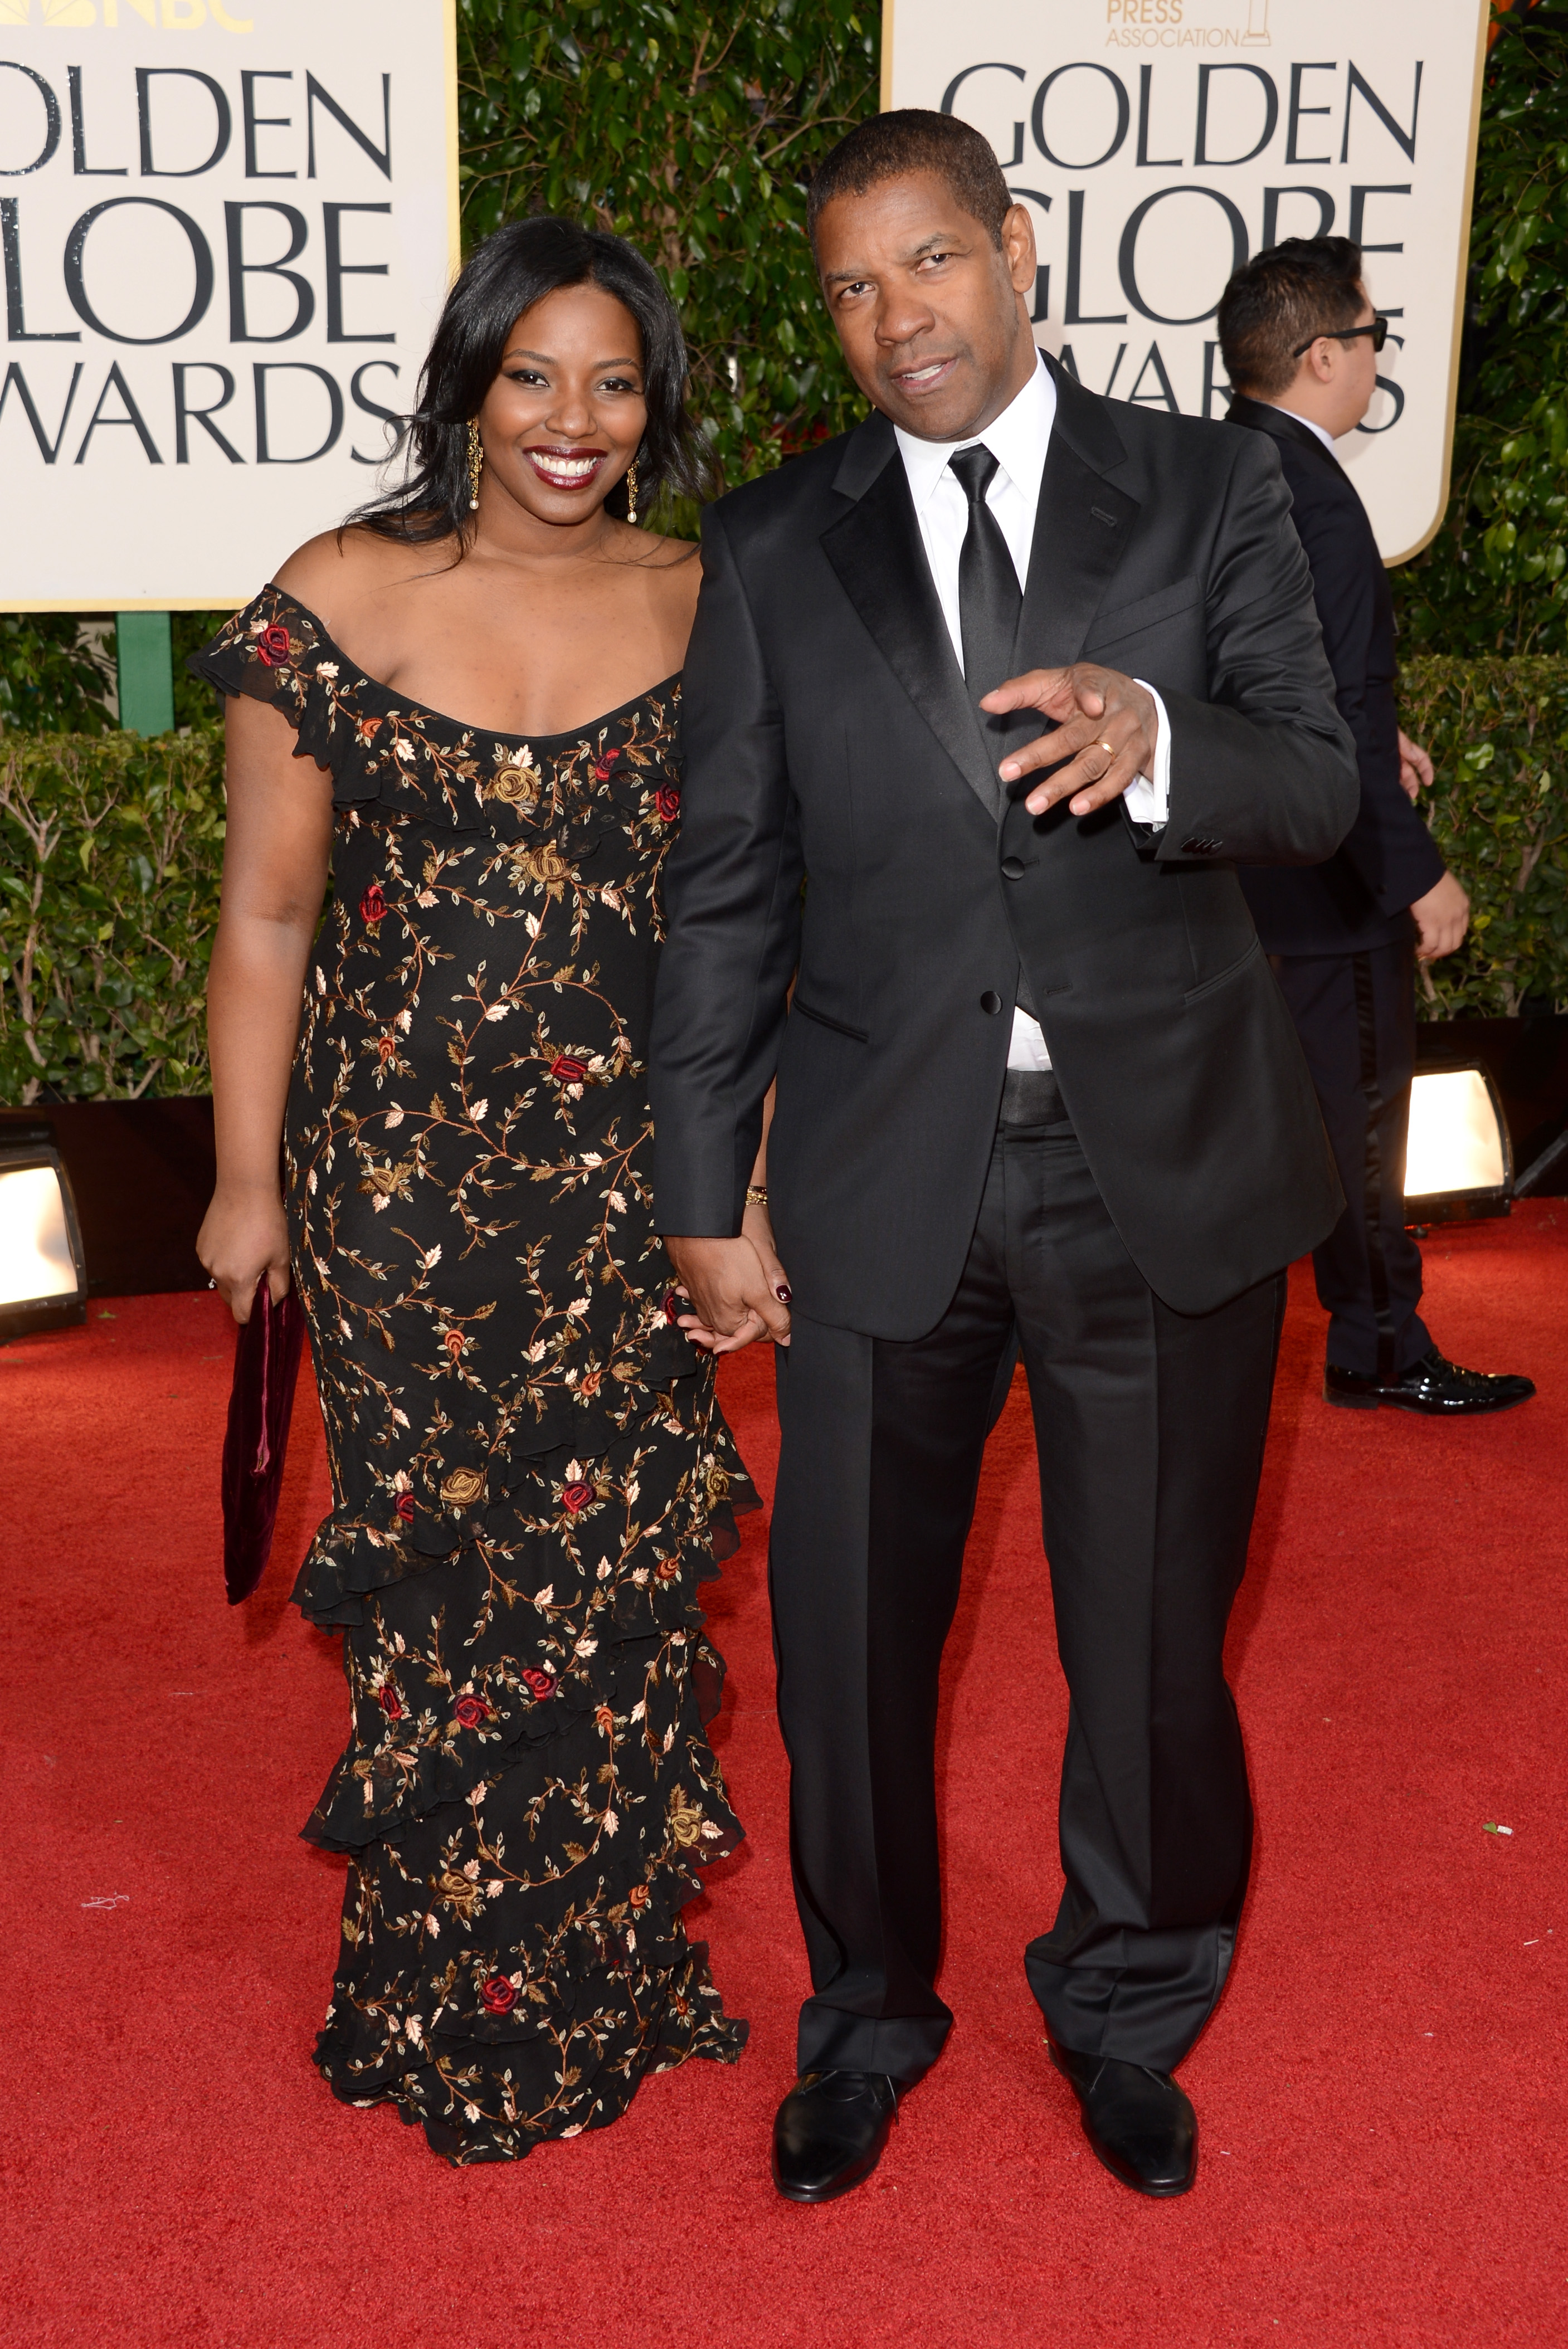 Denzel Washington and his daughter Olivia at the 70th Annual Golden Globe Awards in Beverly Hills, California on January 13, 2013 | Source: Getty Images